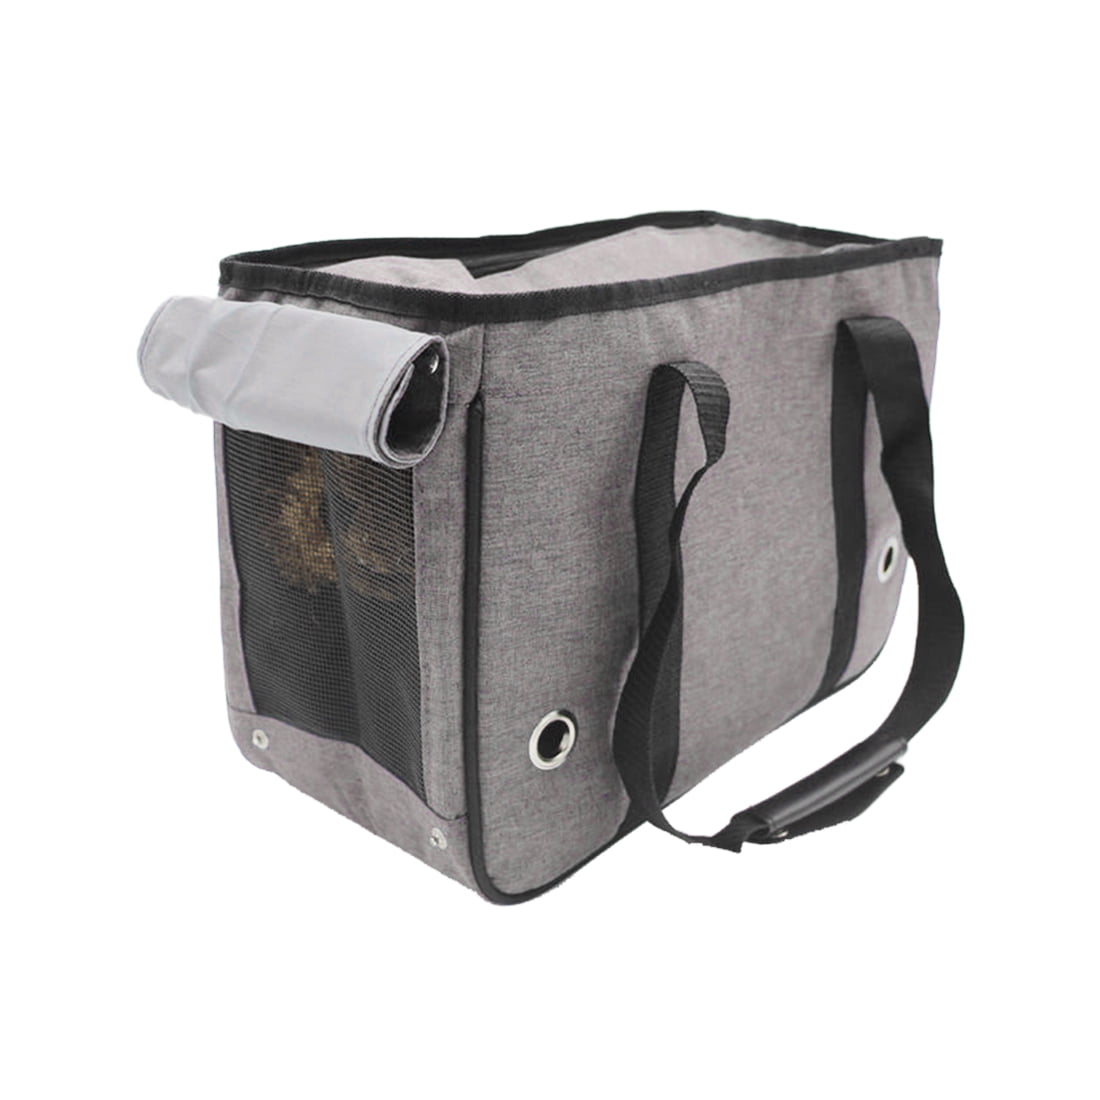 Pet Carrier for Medium Cats and Small Dogs. Safe, Comfortable and